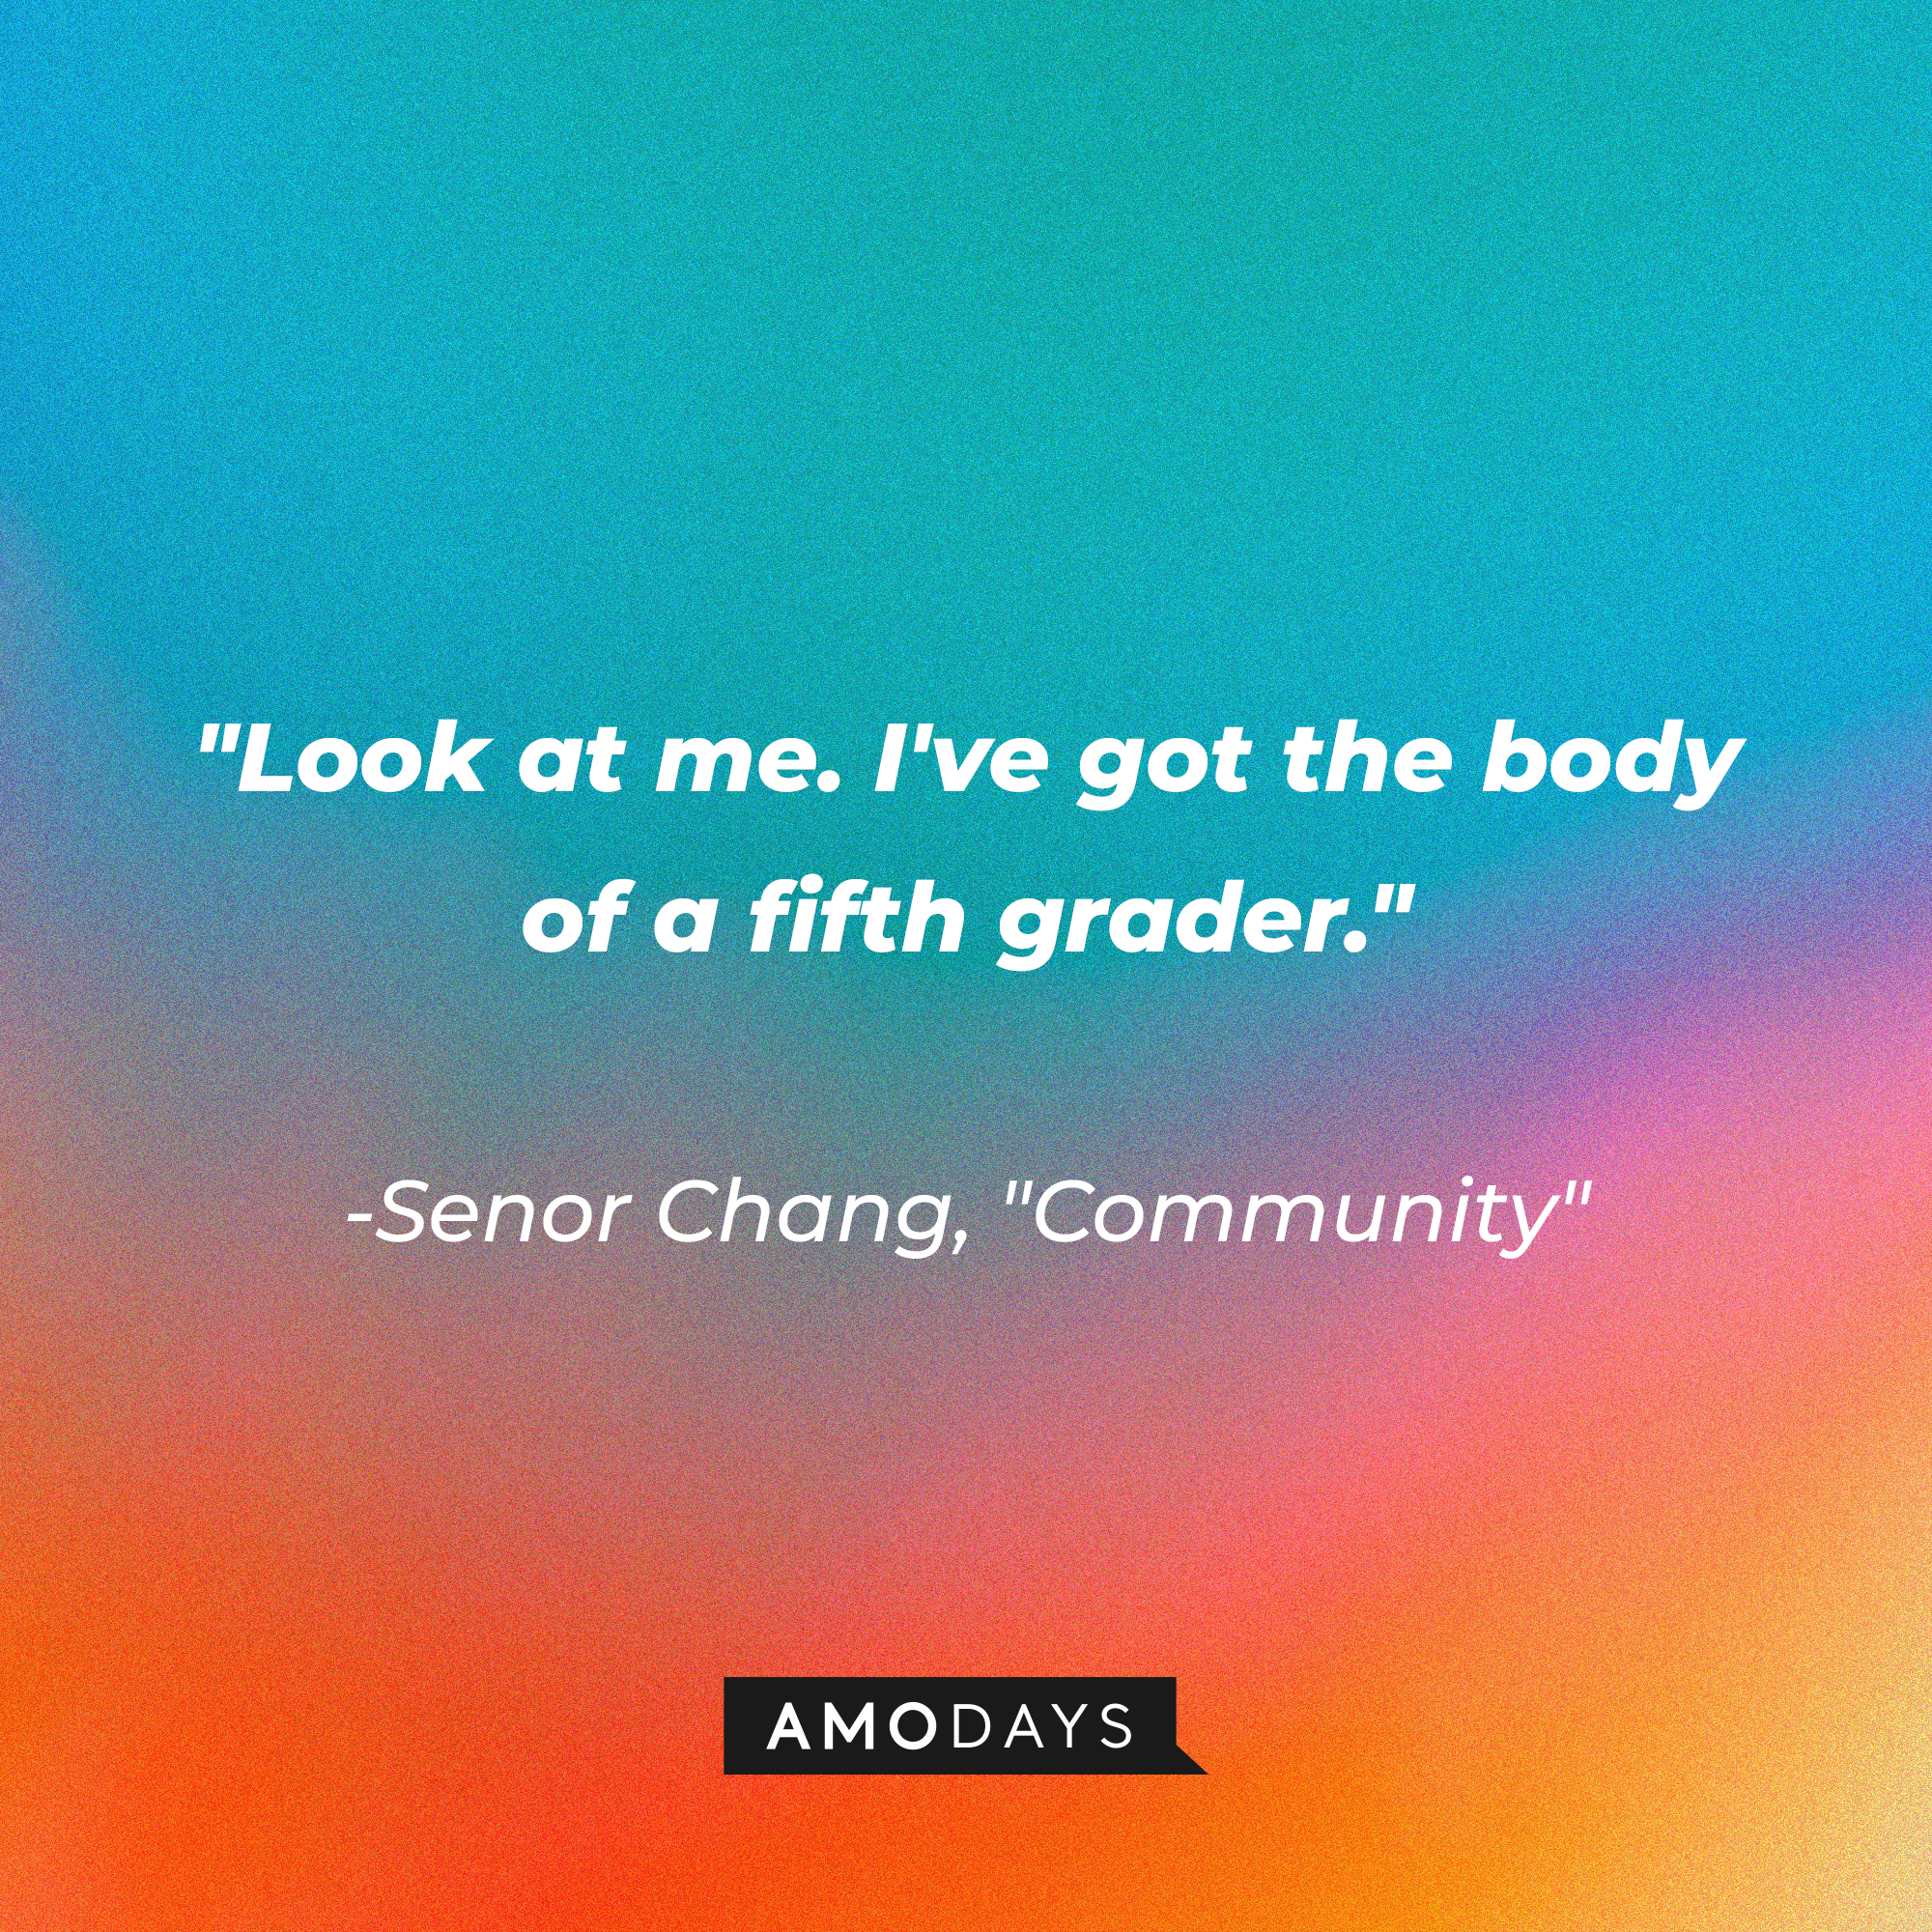 Senor Chang's Quote: "Look at me. I've got the body of a fifth grader." | Source: Amodays